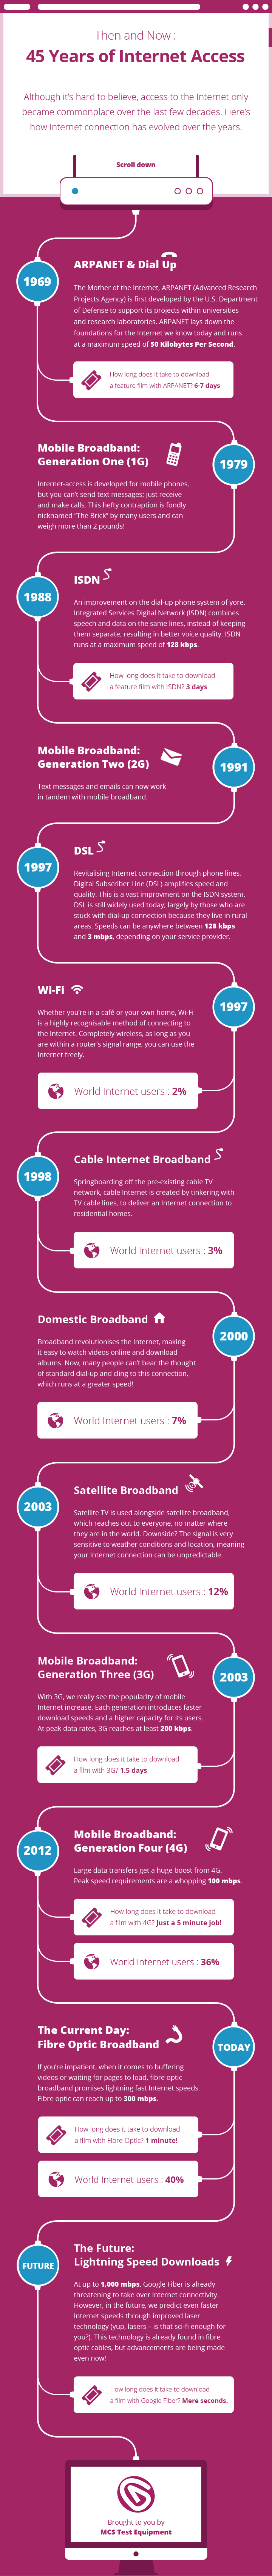 Then and Now - 45 Years of Internet Access